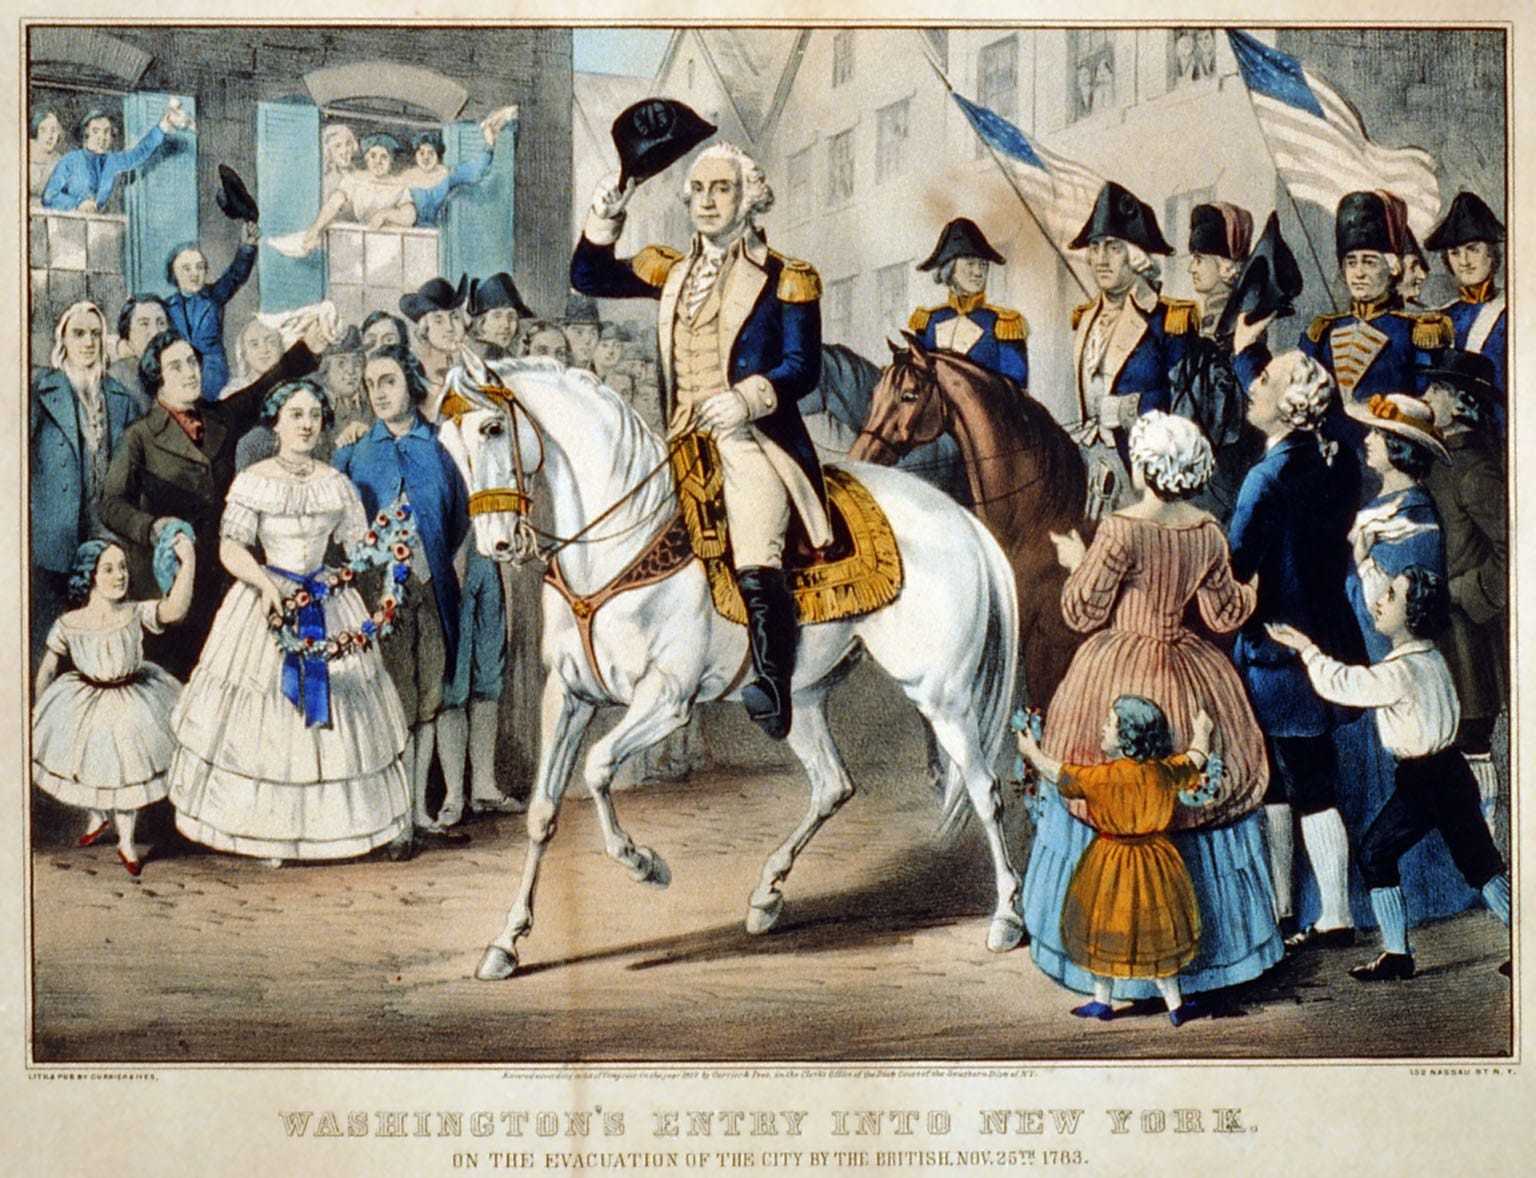 An illustration of George Washington on a white horse with several people surrounding him.